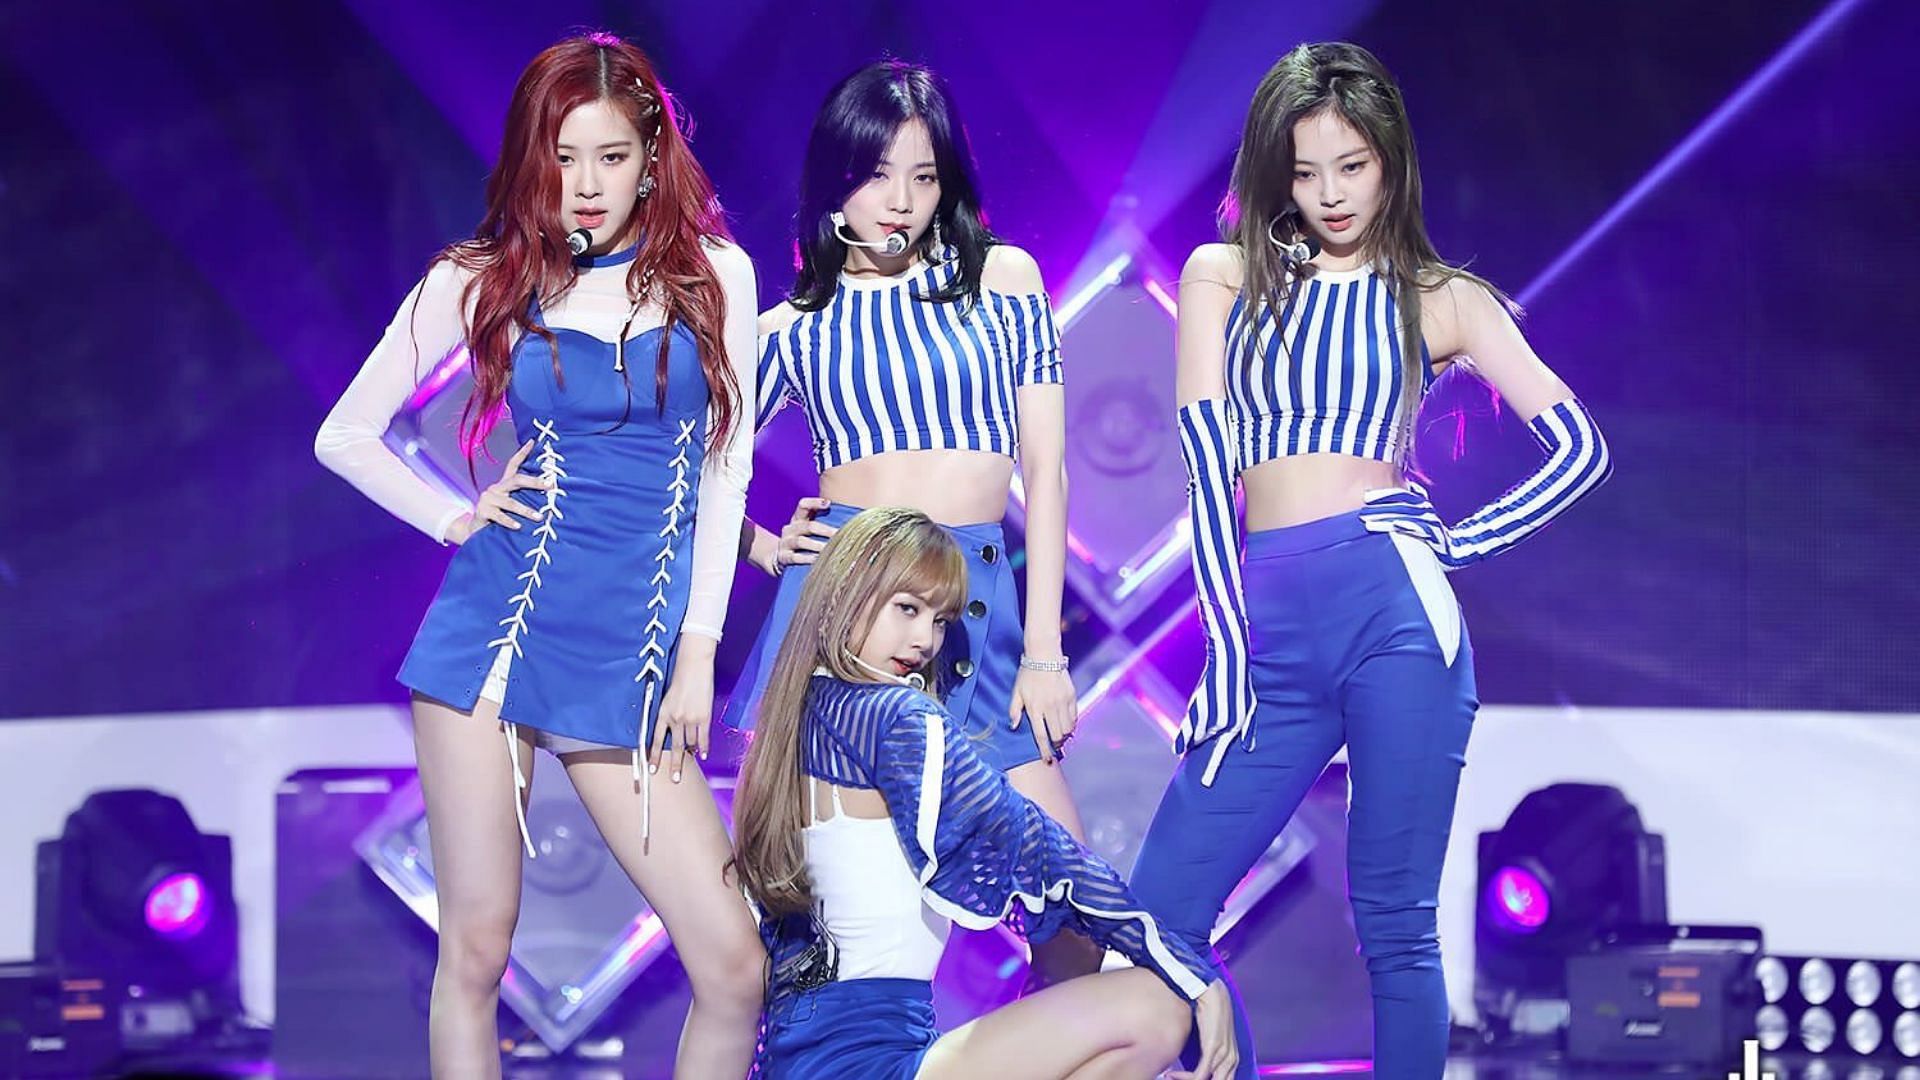 BLACPINK (Image via Getty)